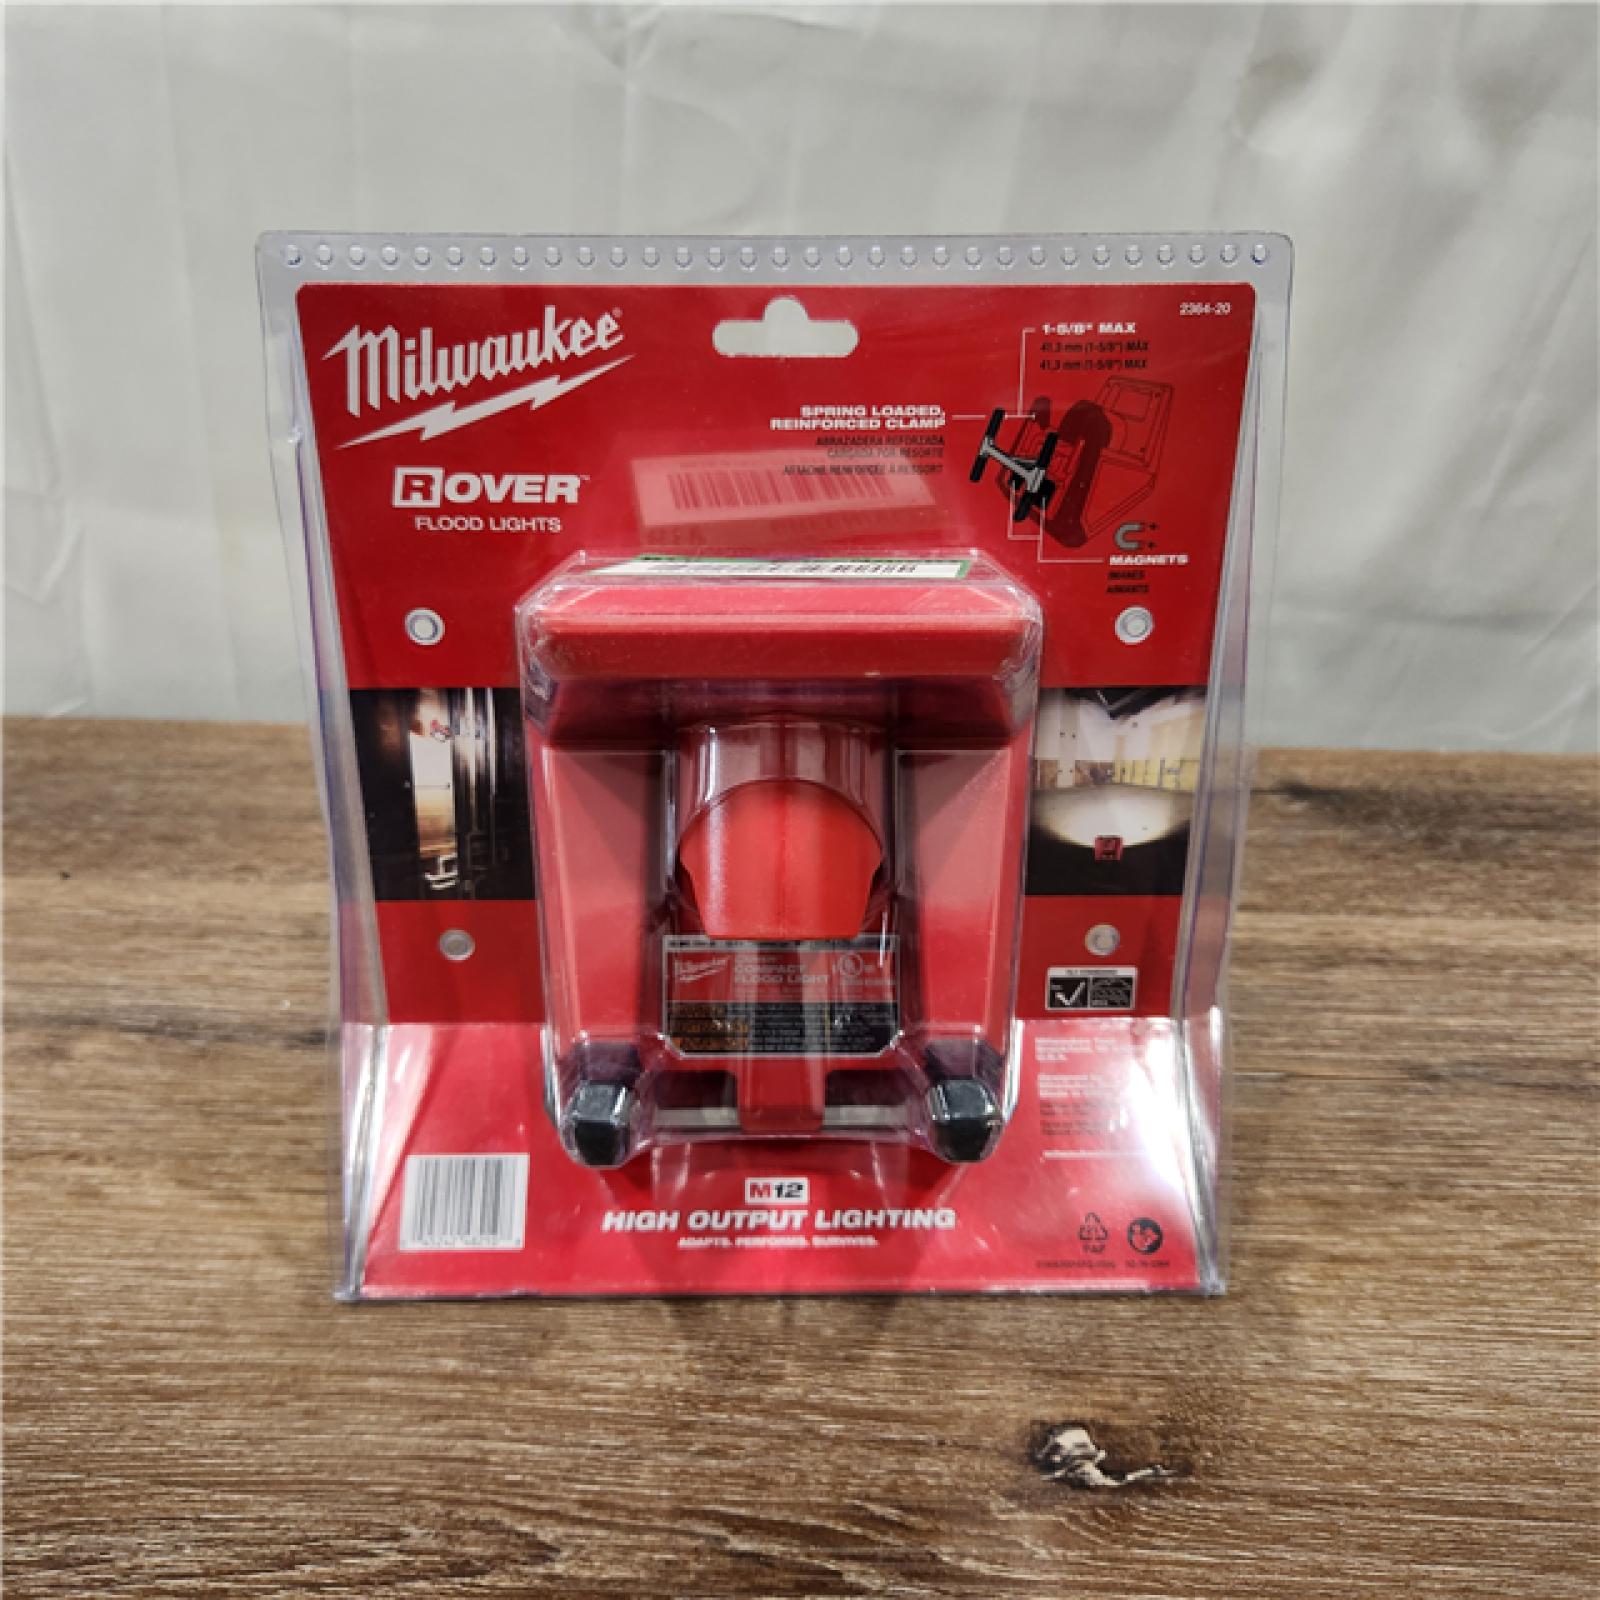 NEW! Milwaukee M12 12-Volt Lithium-Ion Cordless 1000-Lumen Rover LED Compact Flood Light (Tool-Only)